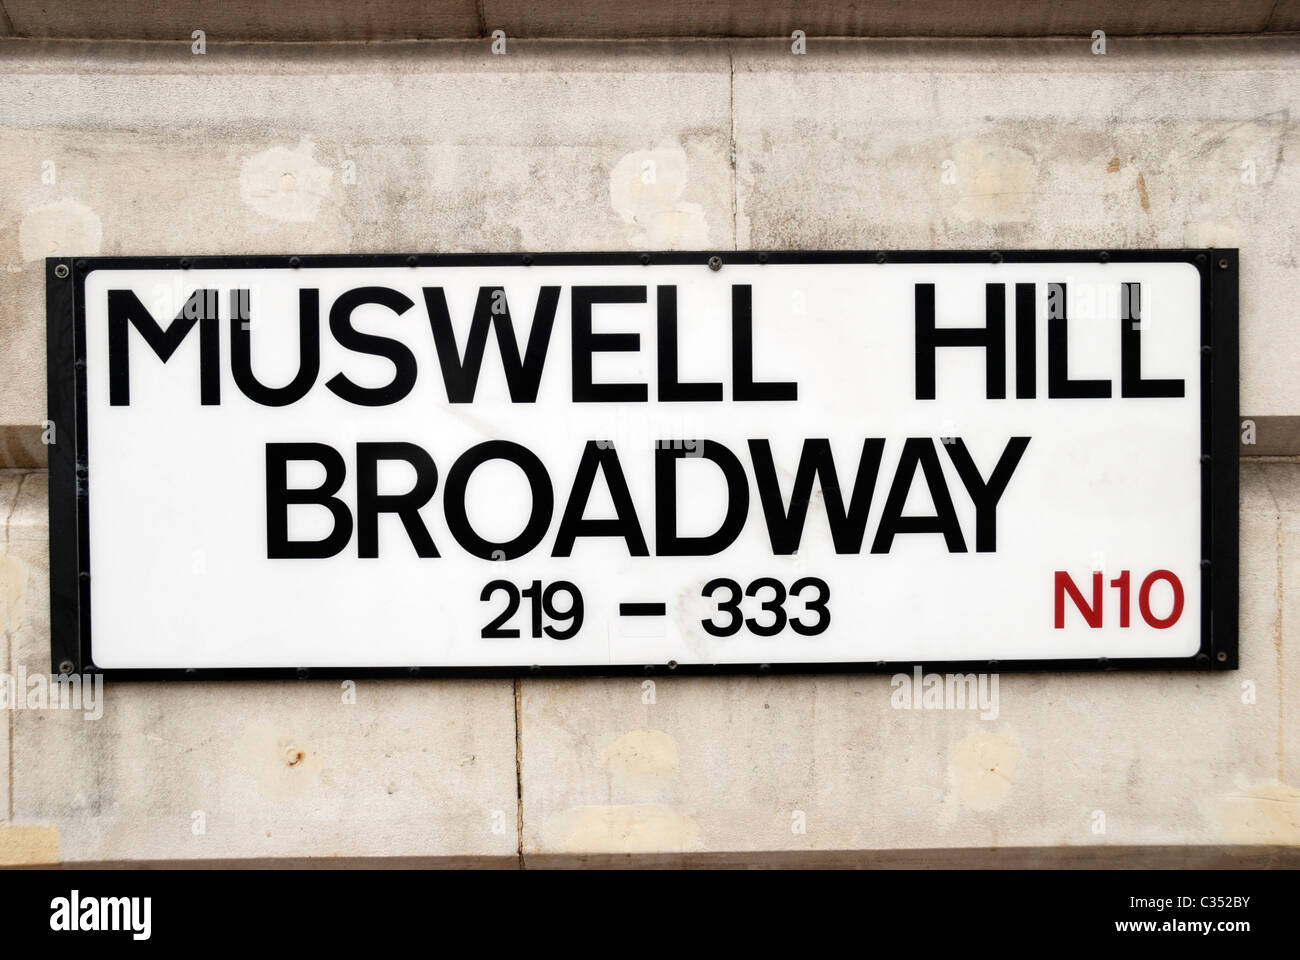 Muswell Hill Broadway N10 street sign, Muswell Hill, London, England Stock Photo